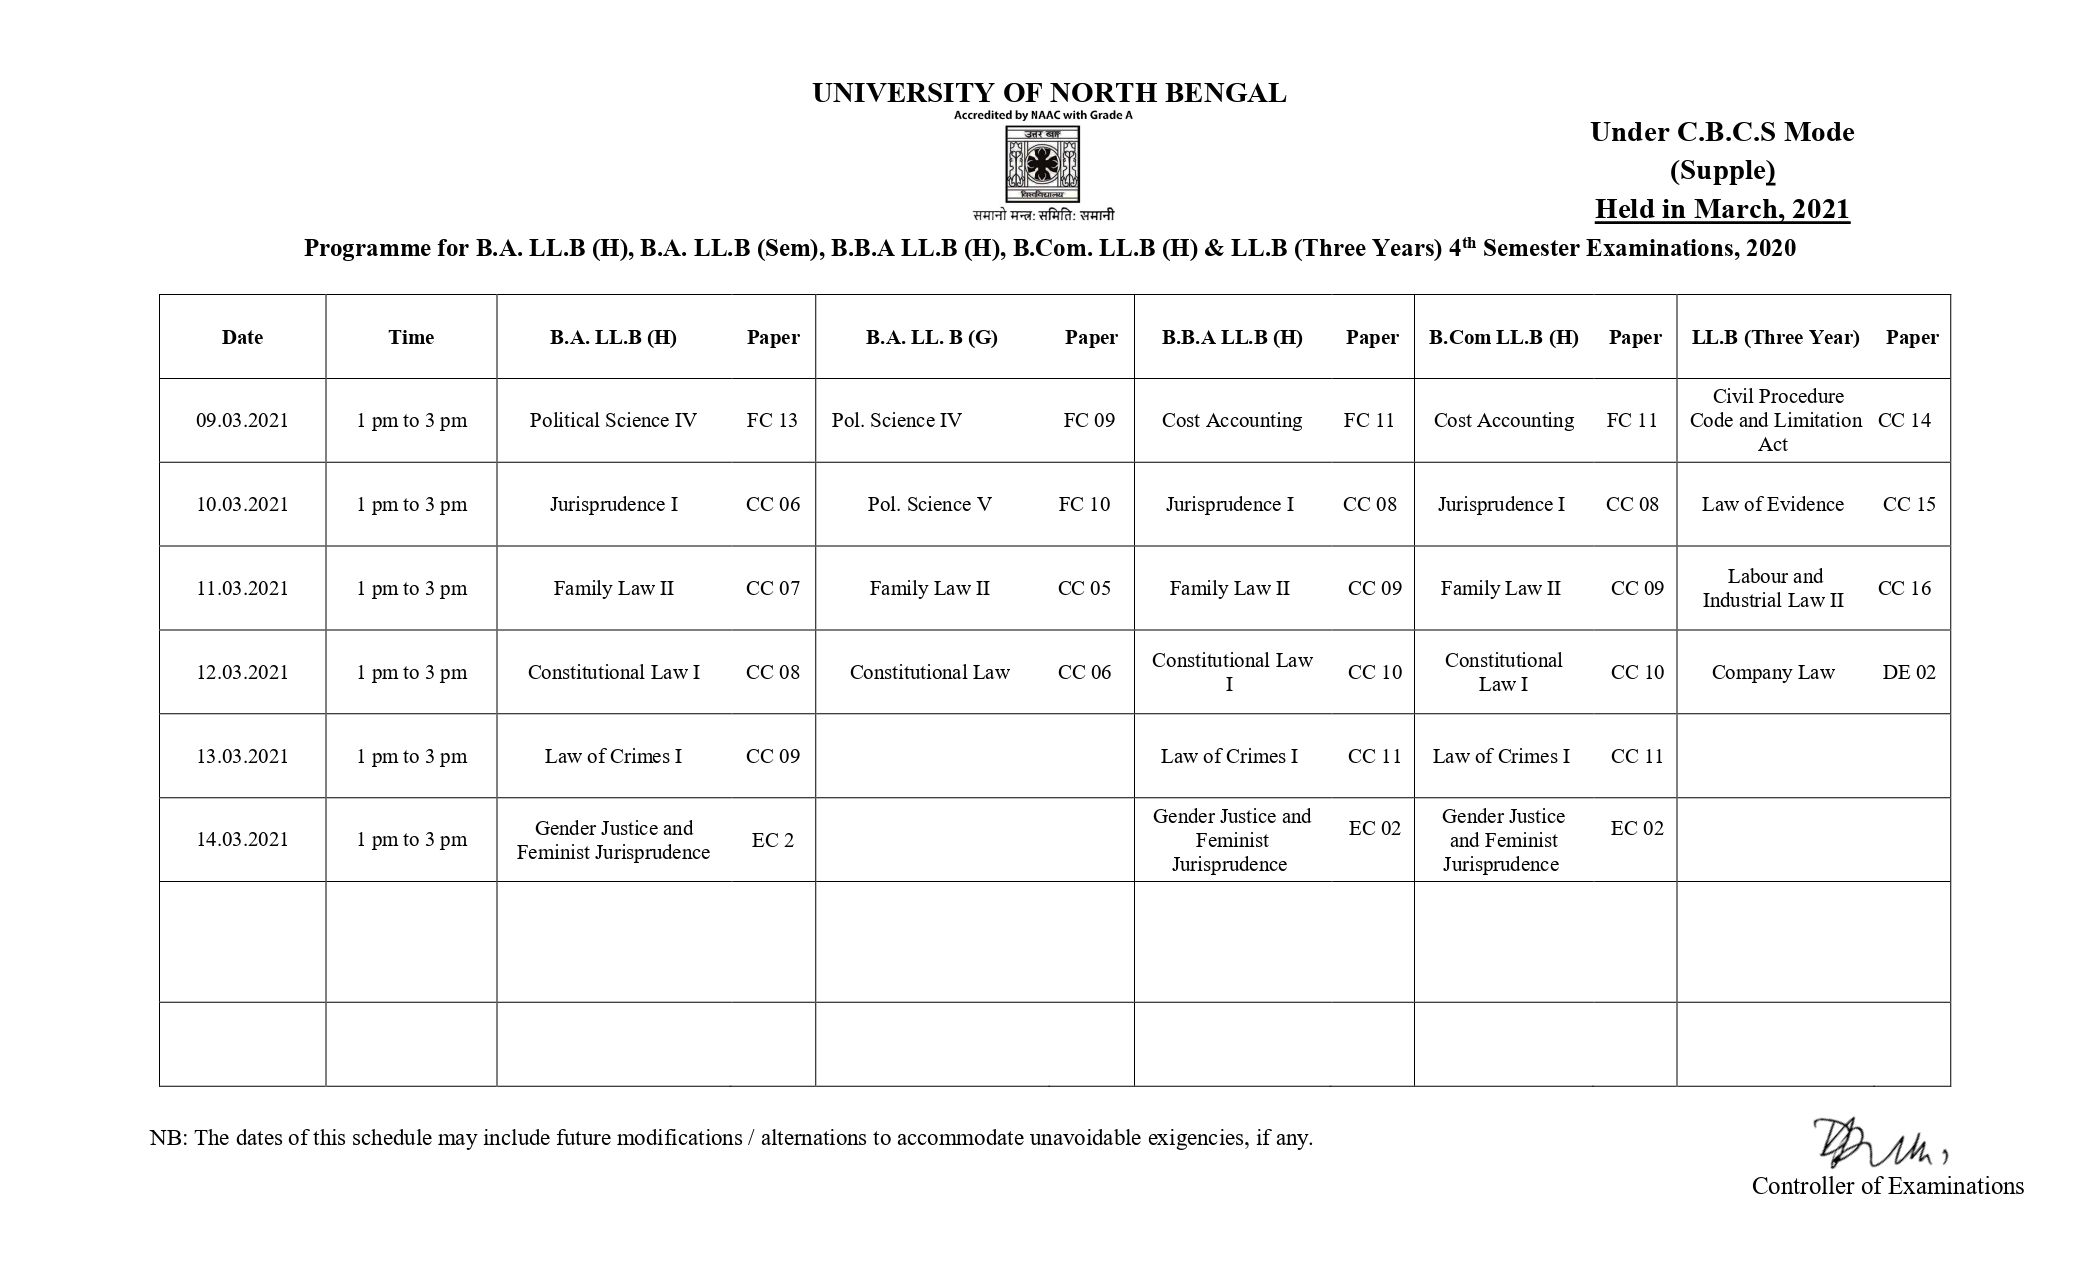 EXAMINATION (MARCH-21) SCHEDULE CBCS MODE SEMESTER-IV